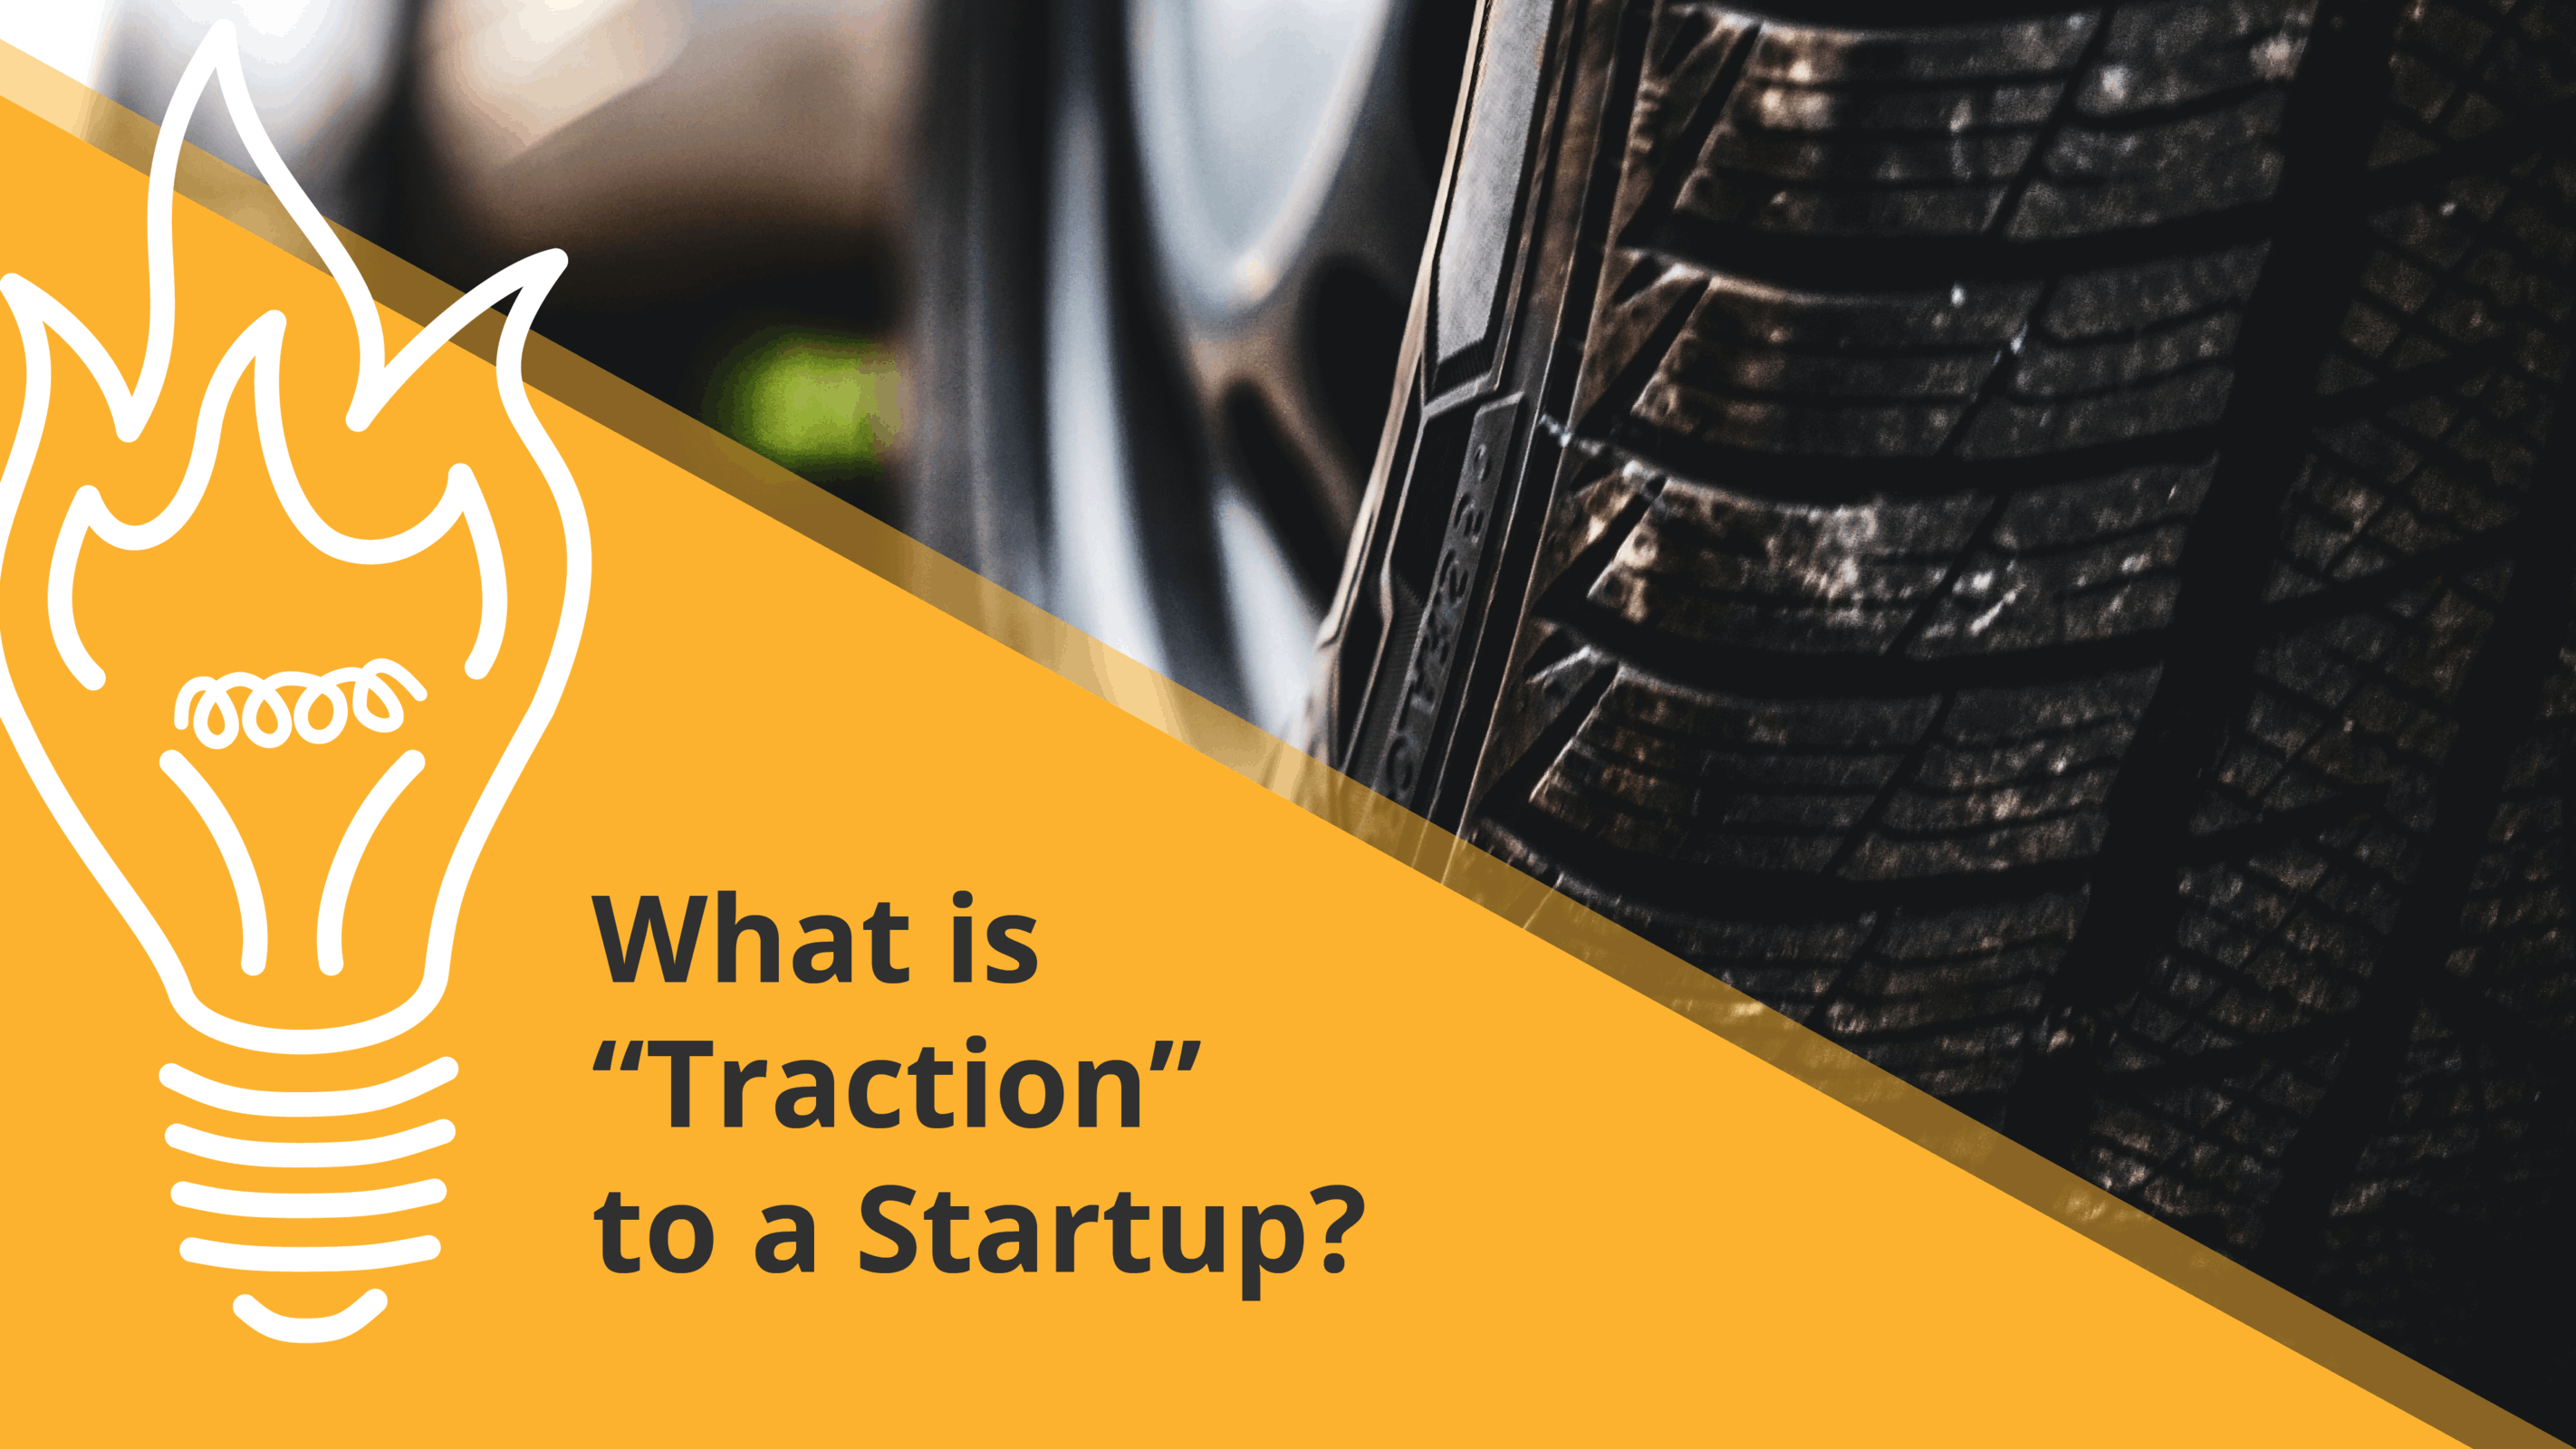 What is Traction